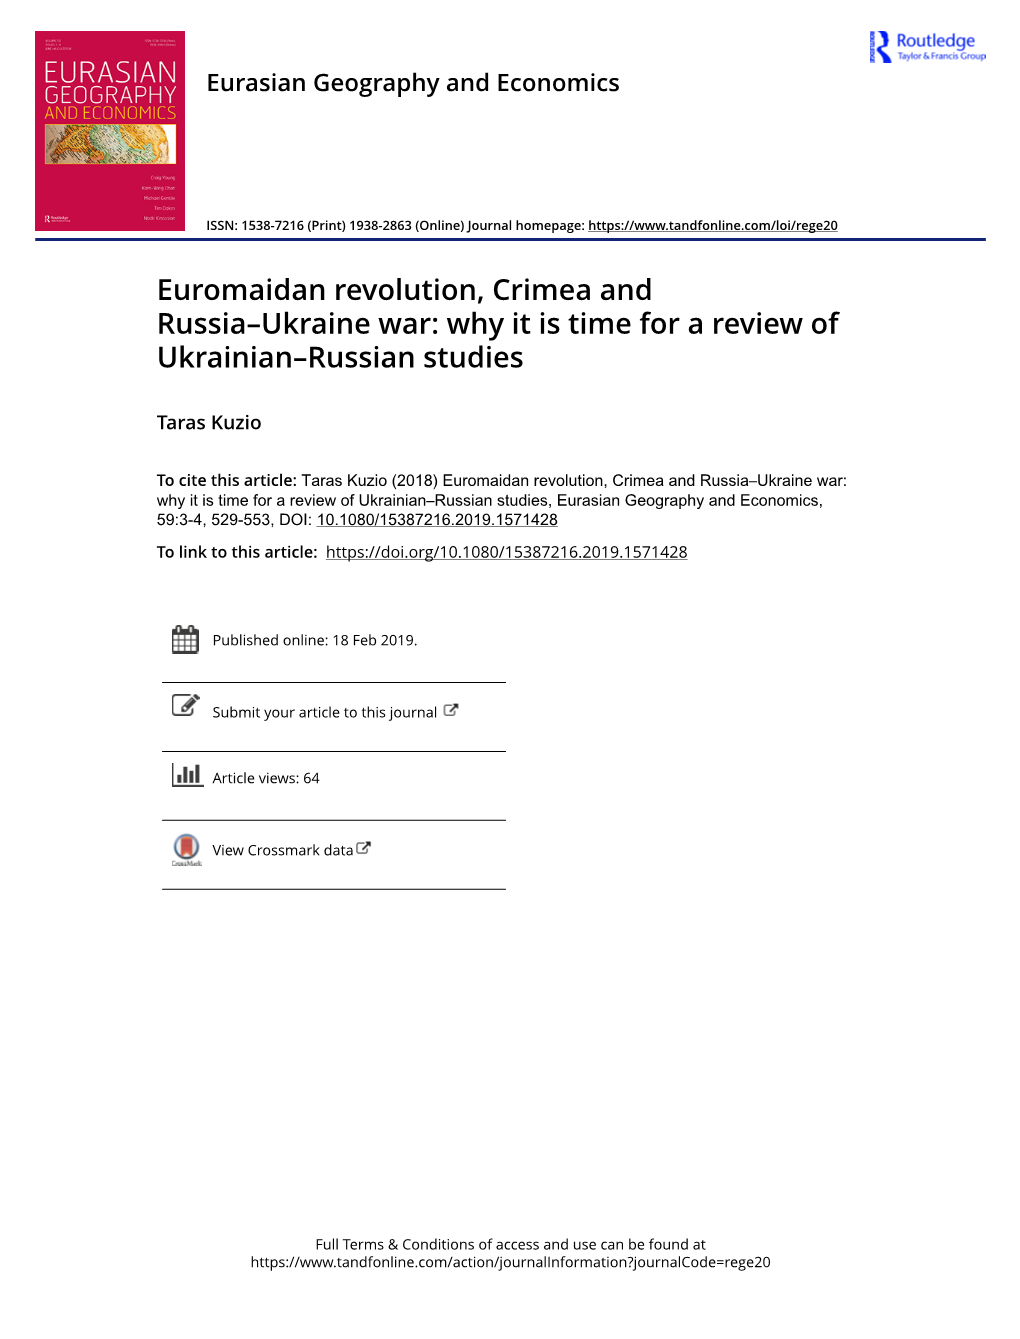 Euromaidan Revolution, Crimea and Russia–Ukraine War: Why It Is Time for a Review of Ukrainian–Russian Studies